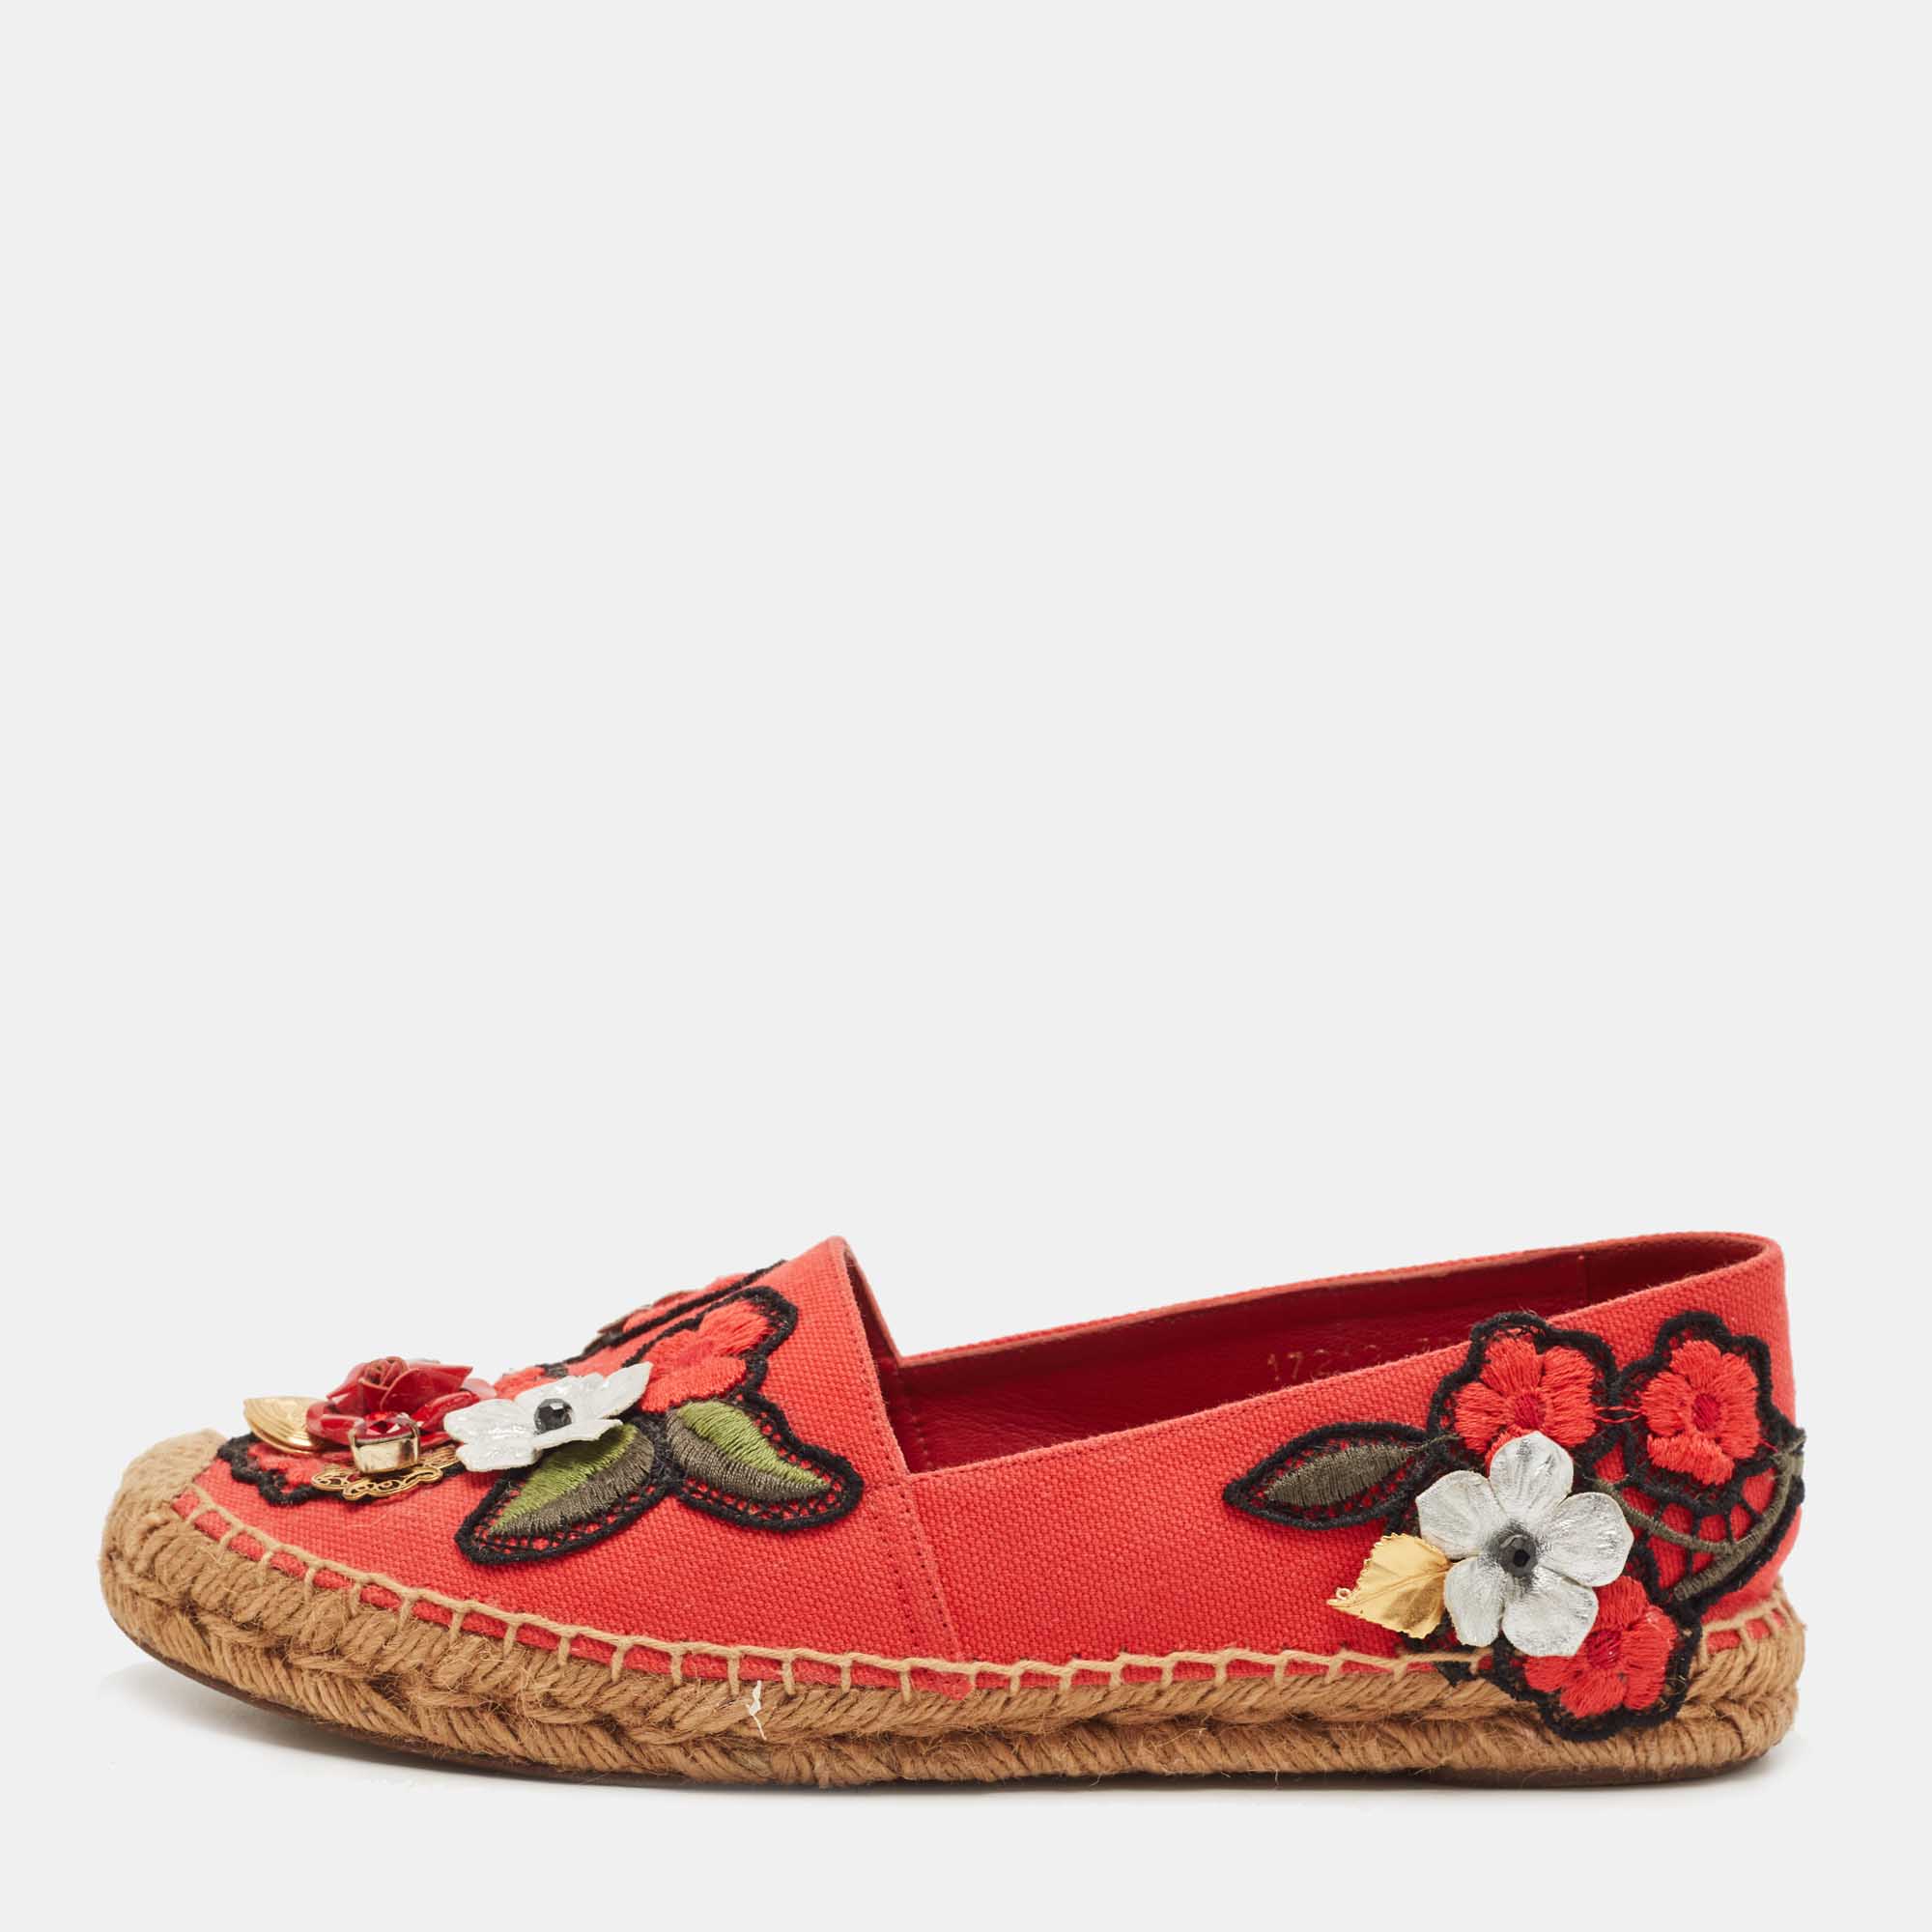 Pre-owned Dolce & Gabbana Red Canvas Locket Flower Jewel Embroidered Espadrilles Flats Size 37